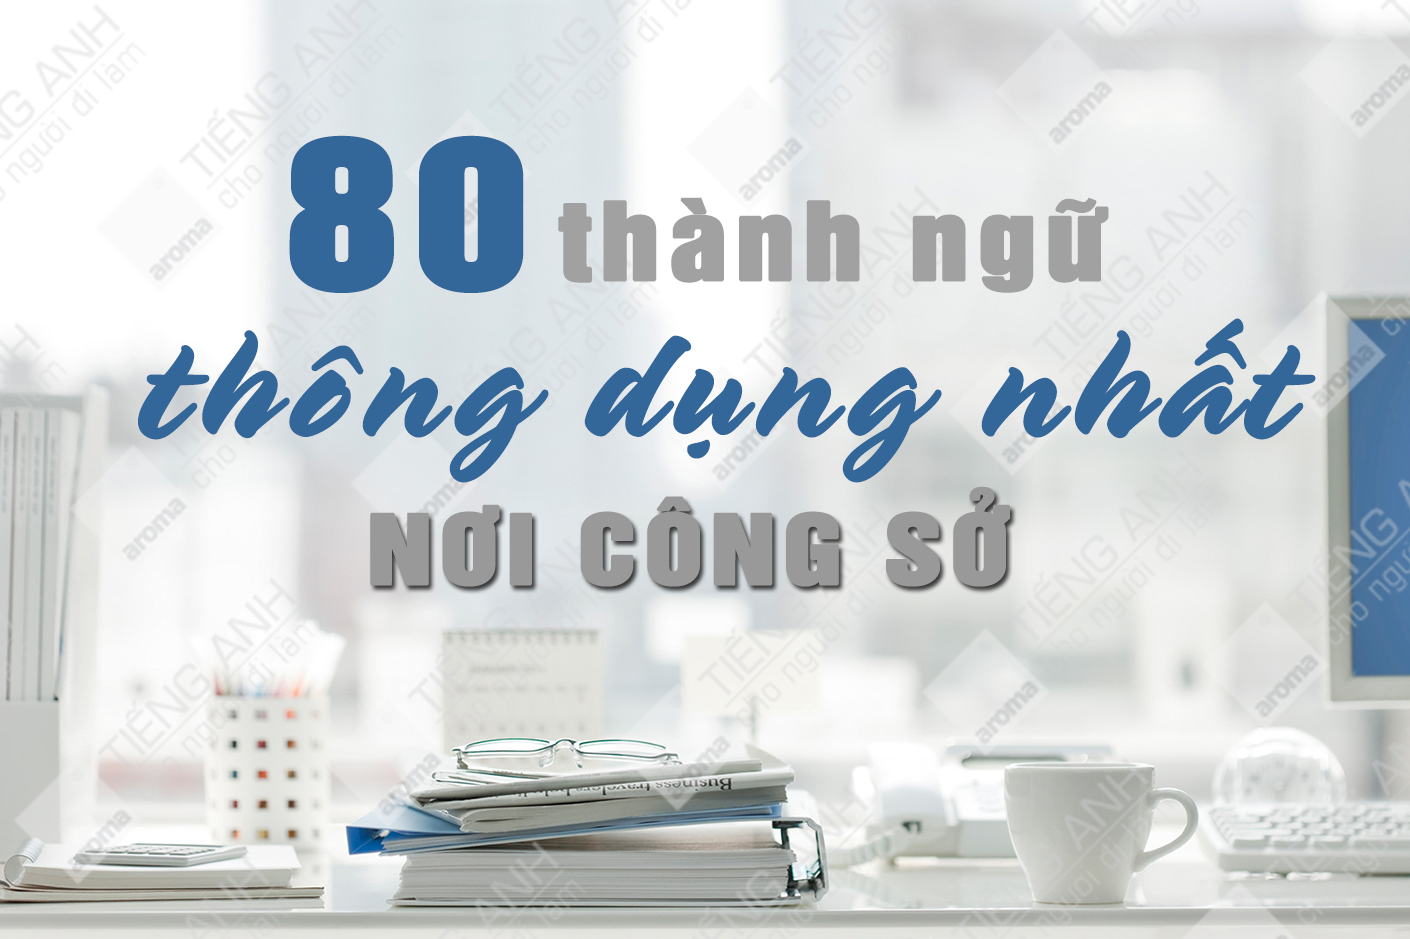 UPLOADING 1 / 1 – 80-thanh-ngu-tieng-anh-cong-so-cover.png ATTACHMENT DETAILS 80-thanh-ngu-tieng-anh-cong-so-cover